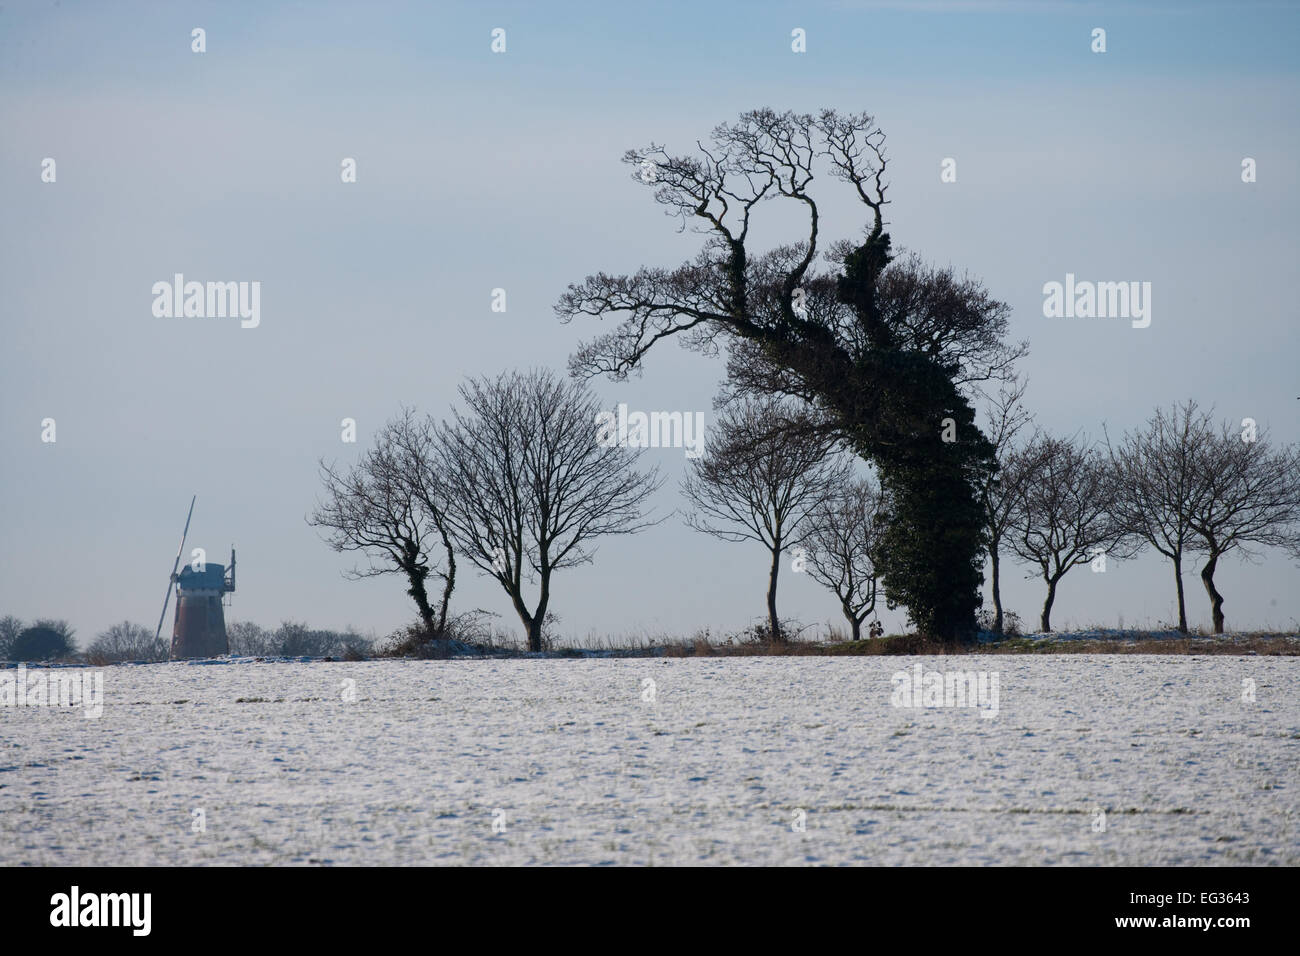 Winter weather scene. Snowfall across arable farm field. Oak tree (Quercus robur),  clad in Ivy (Hedera helix), and restored win Stock Photo